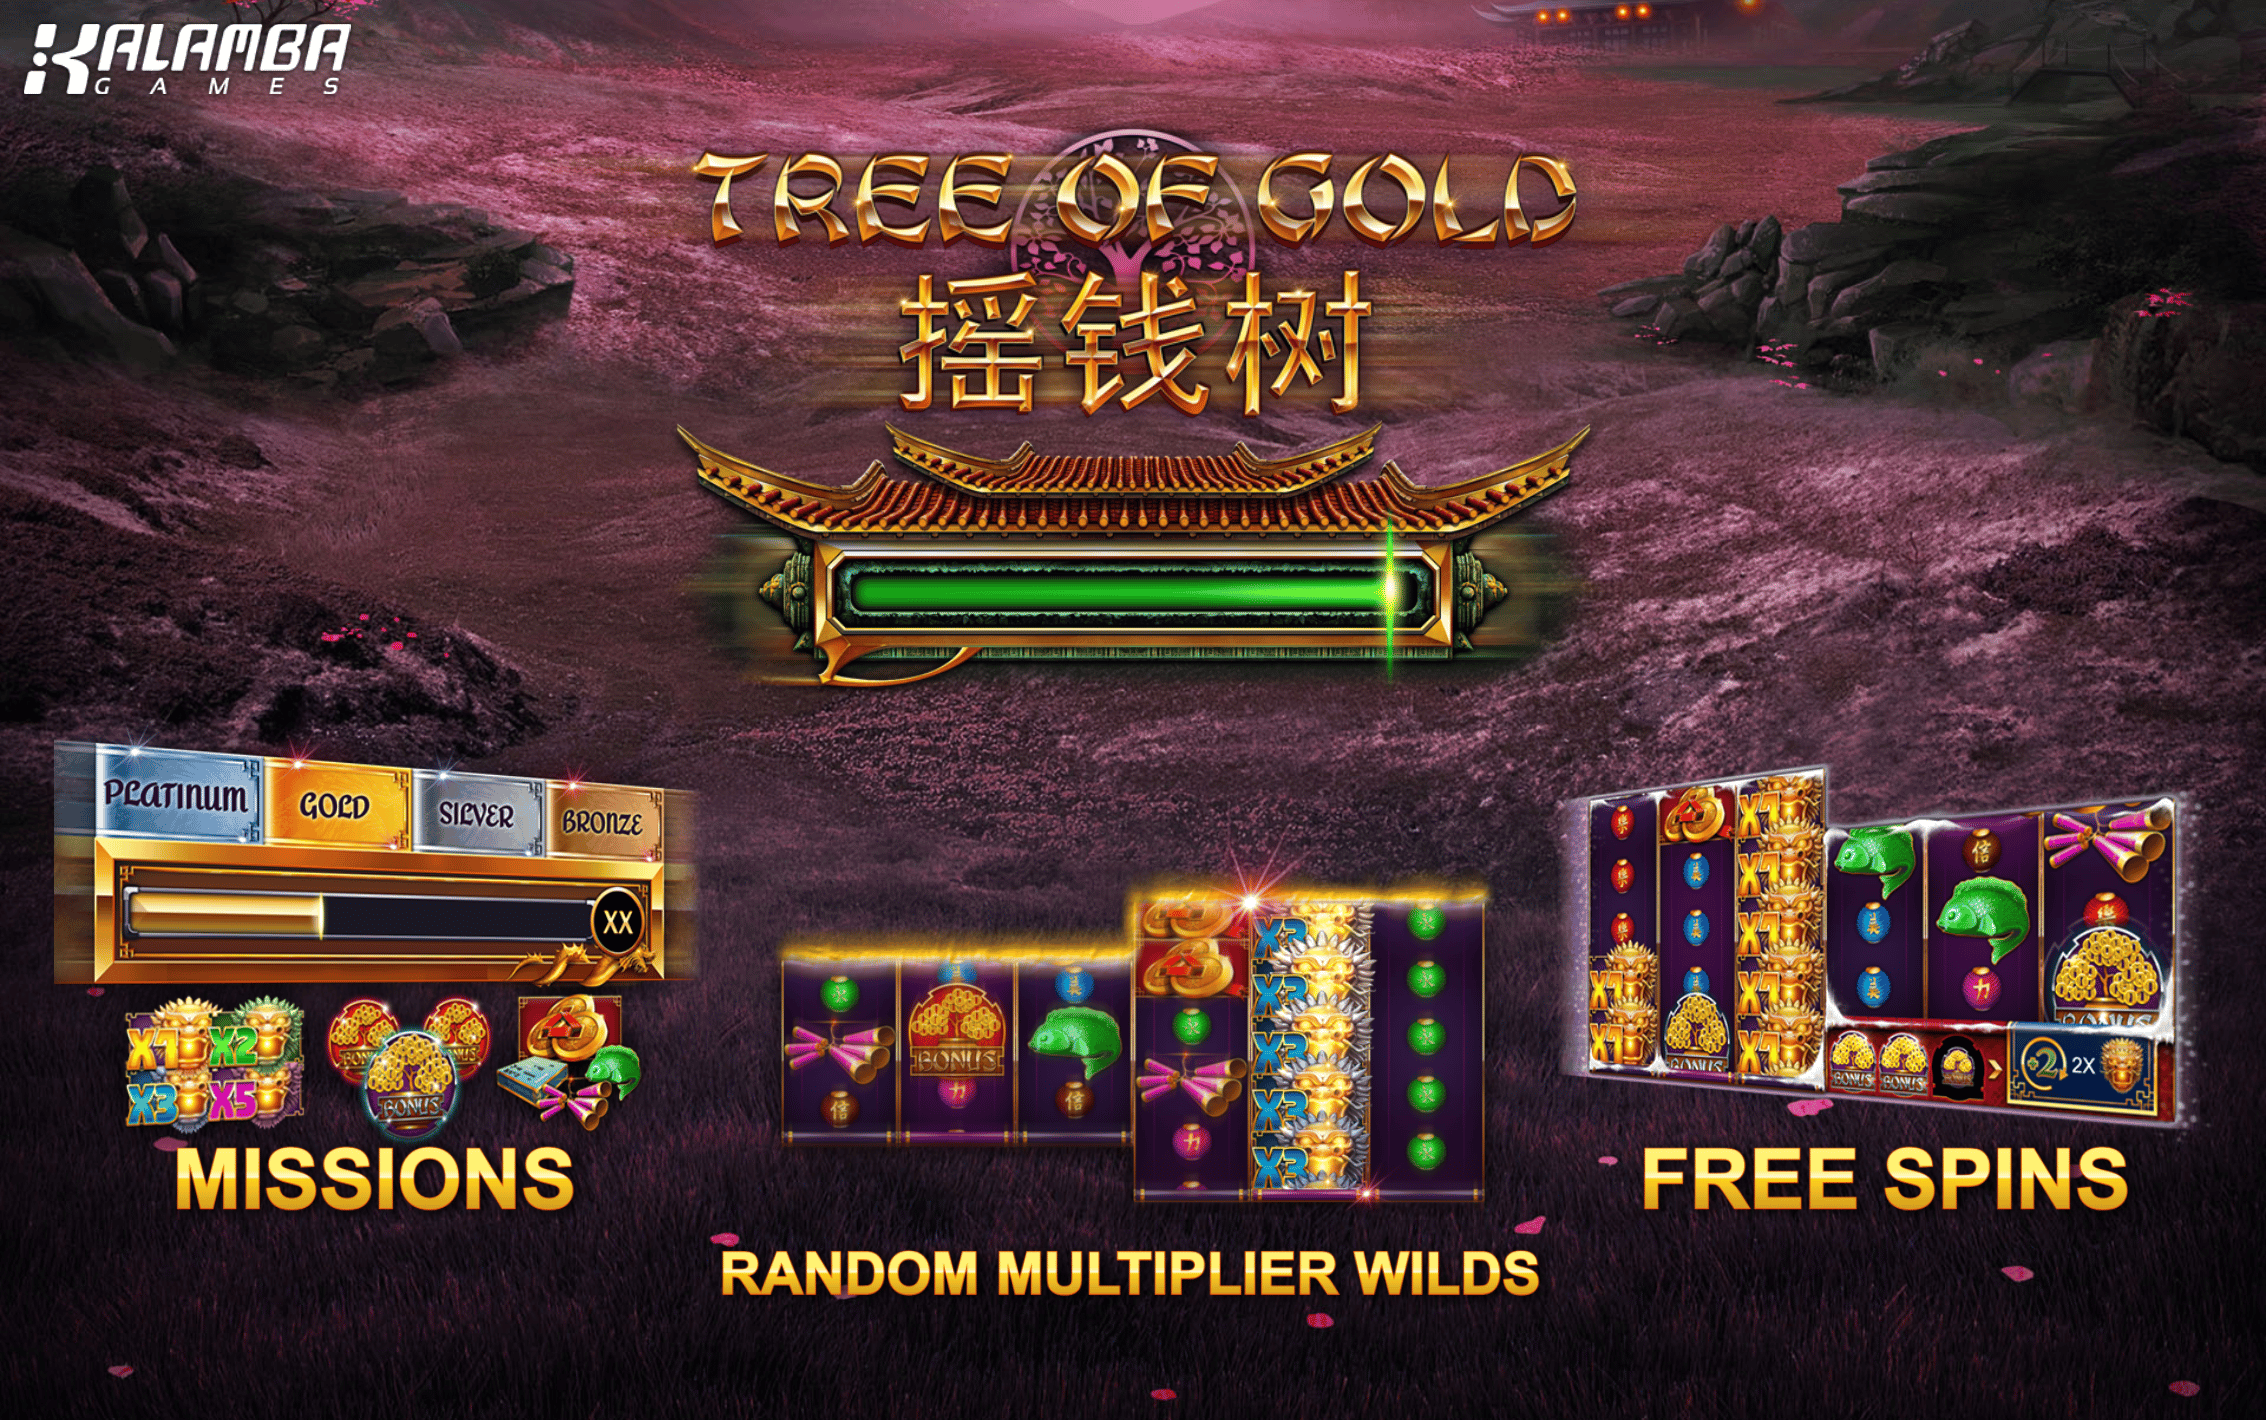 Tree of Gold features